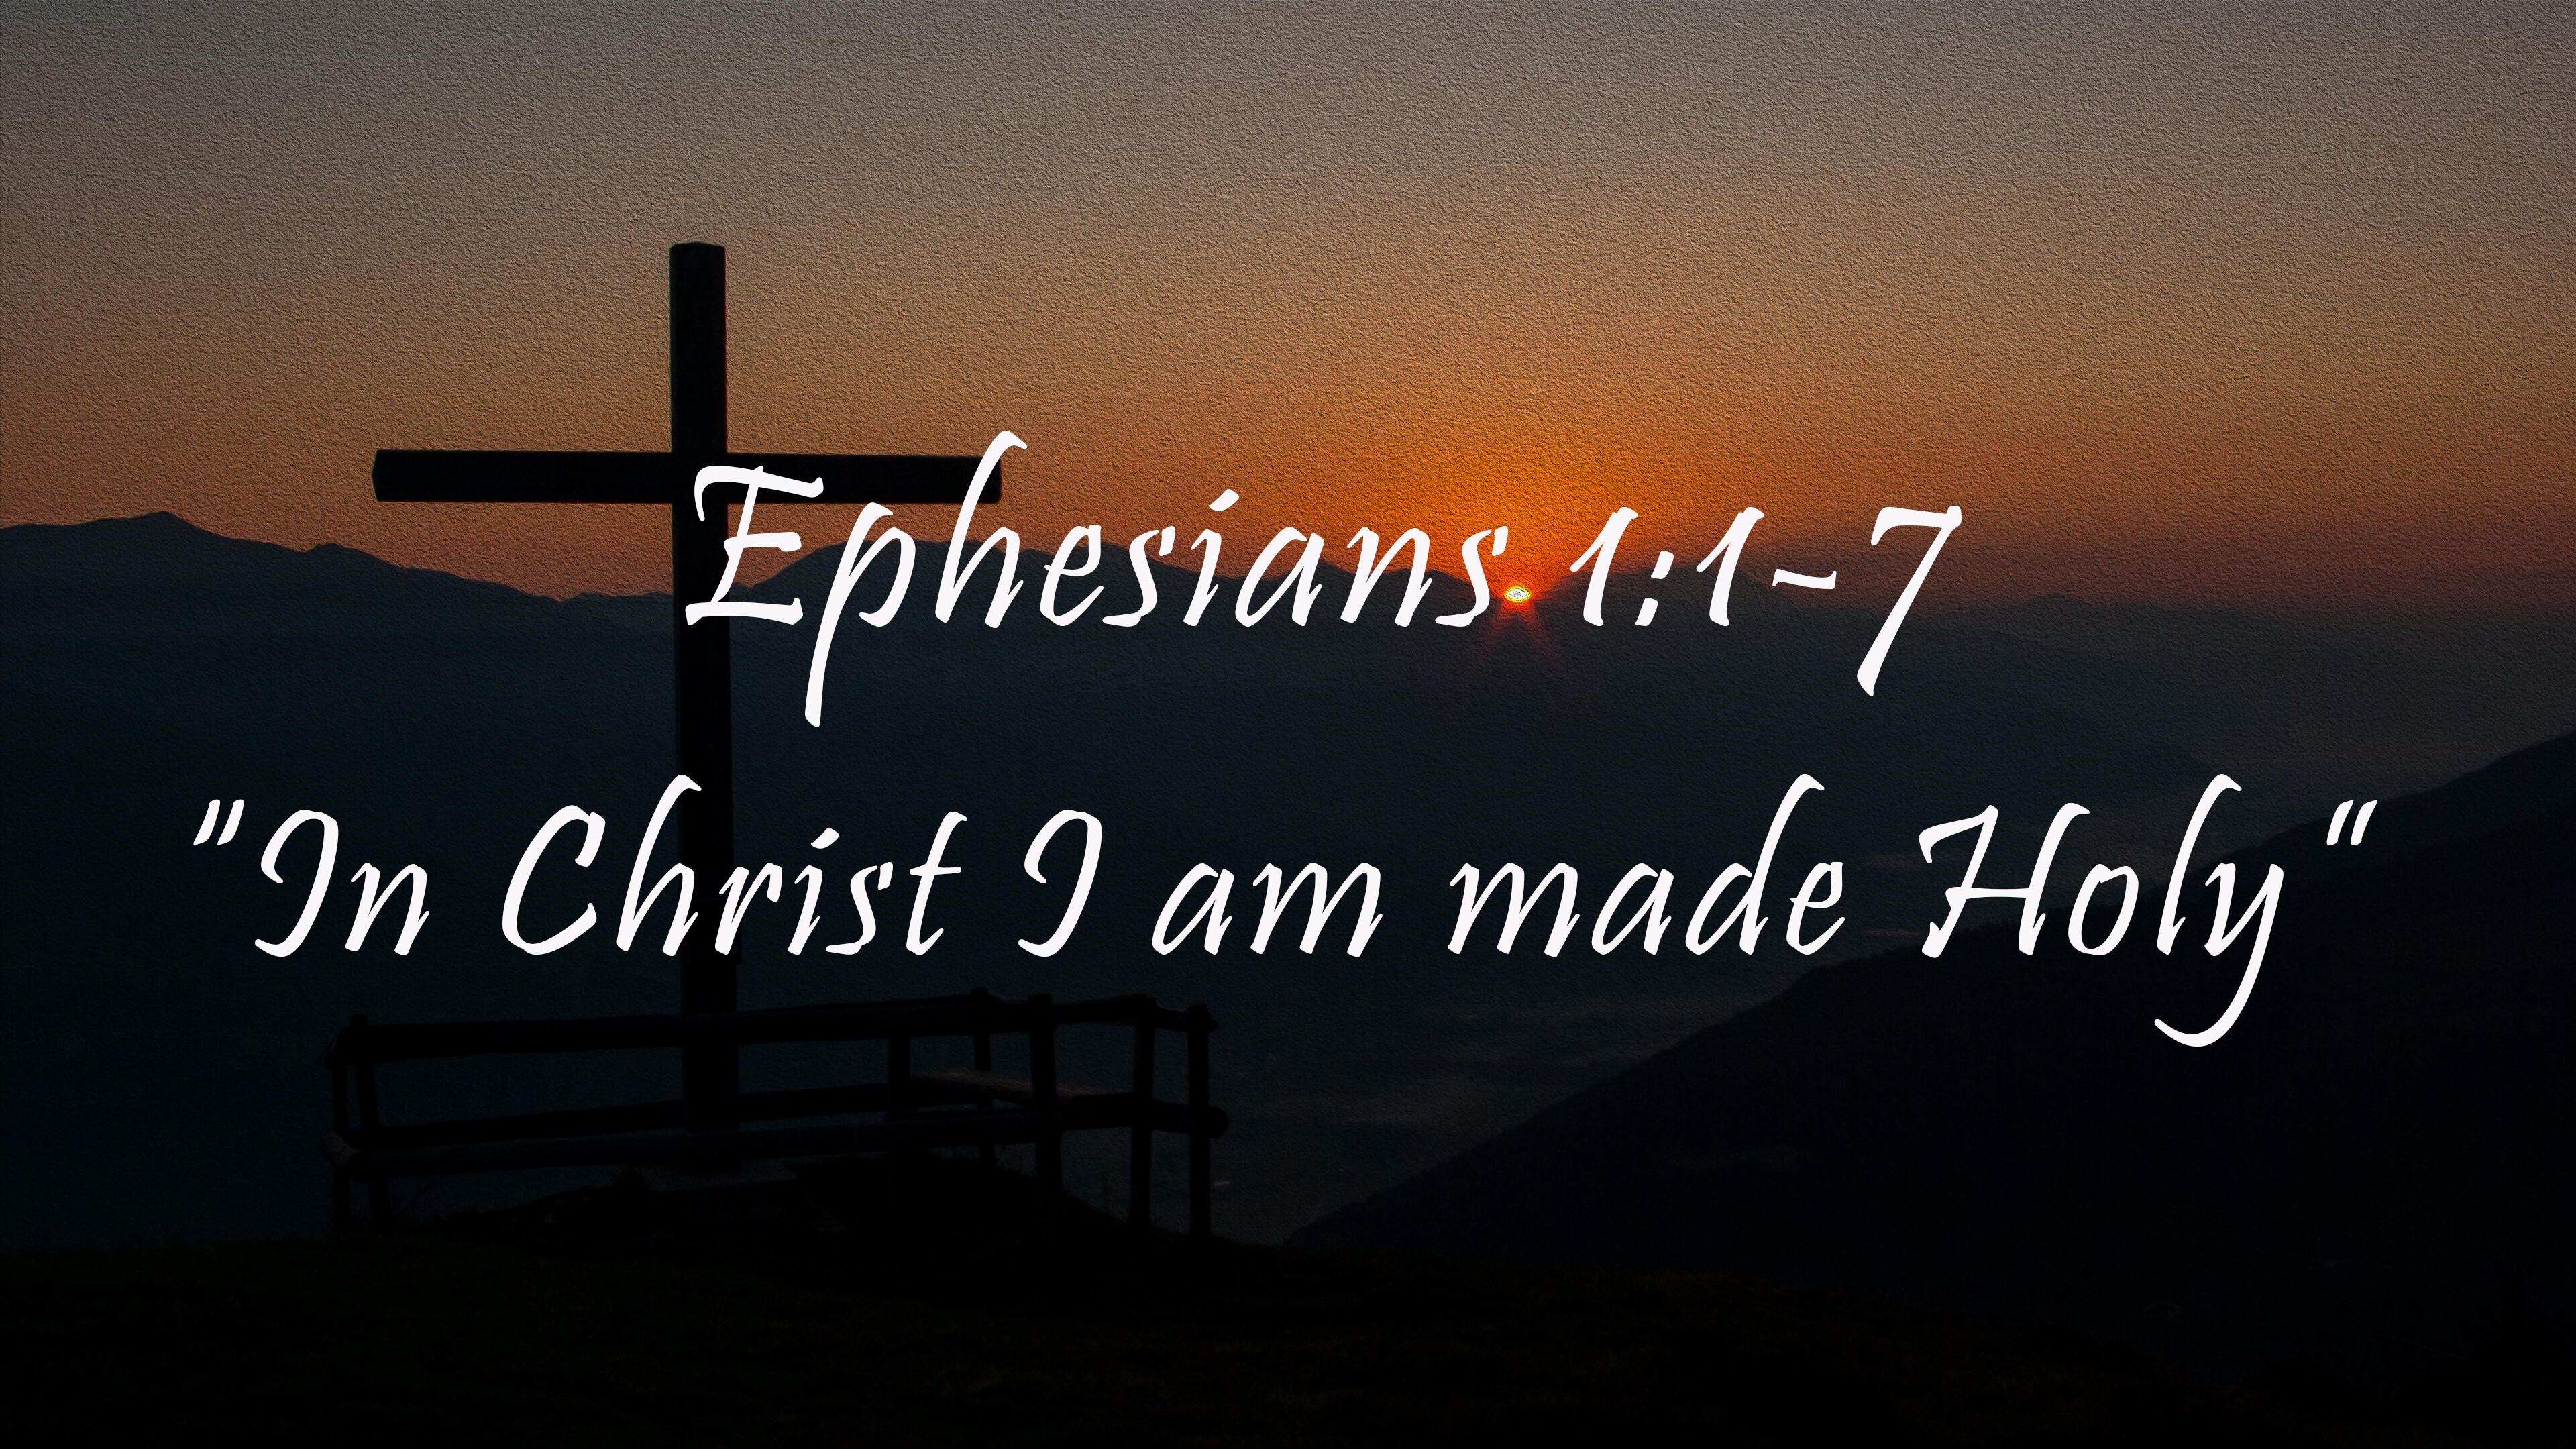 In Christ I am made Holy